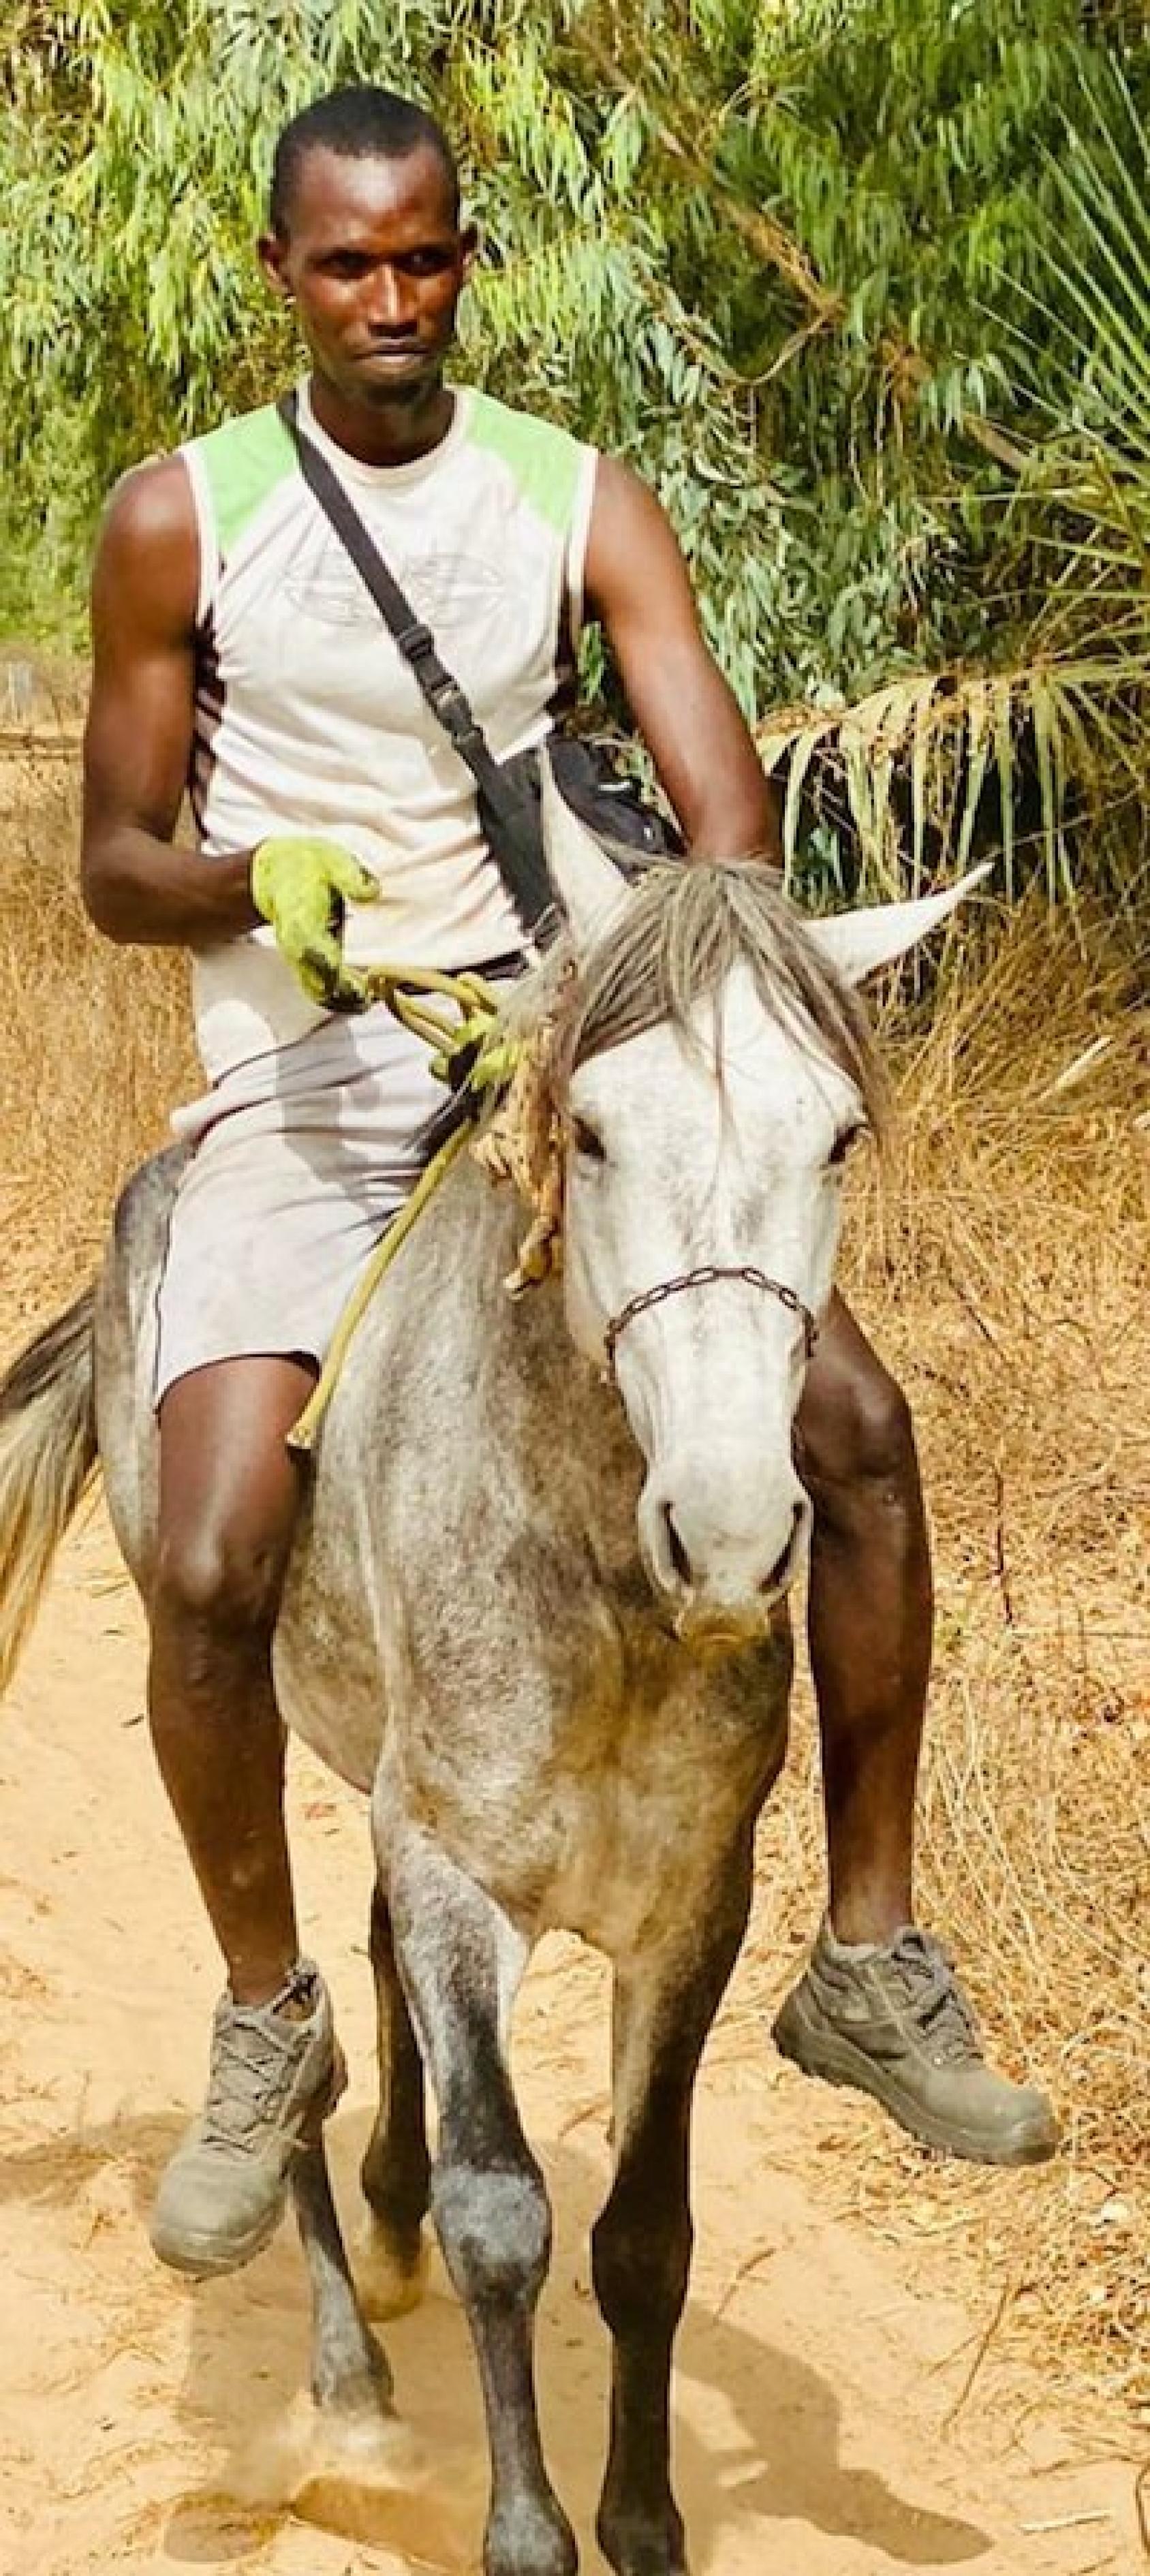 A man in a white shirt rides a donkey in a dusty village